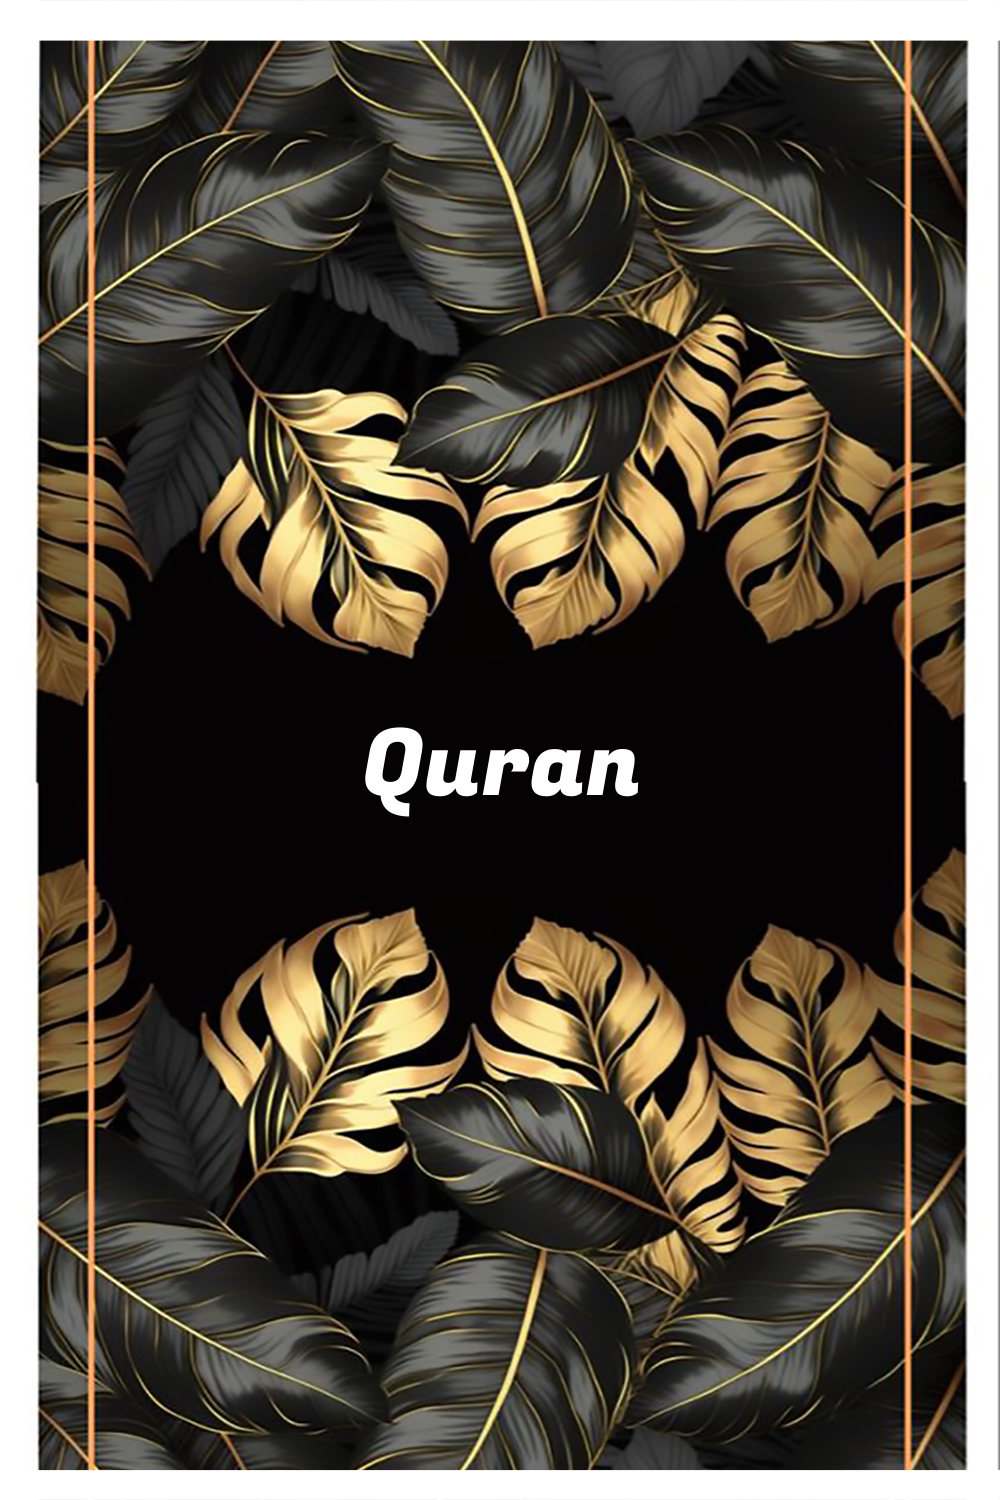 Quran Name Meaning - قرآن Origin and Popularity